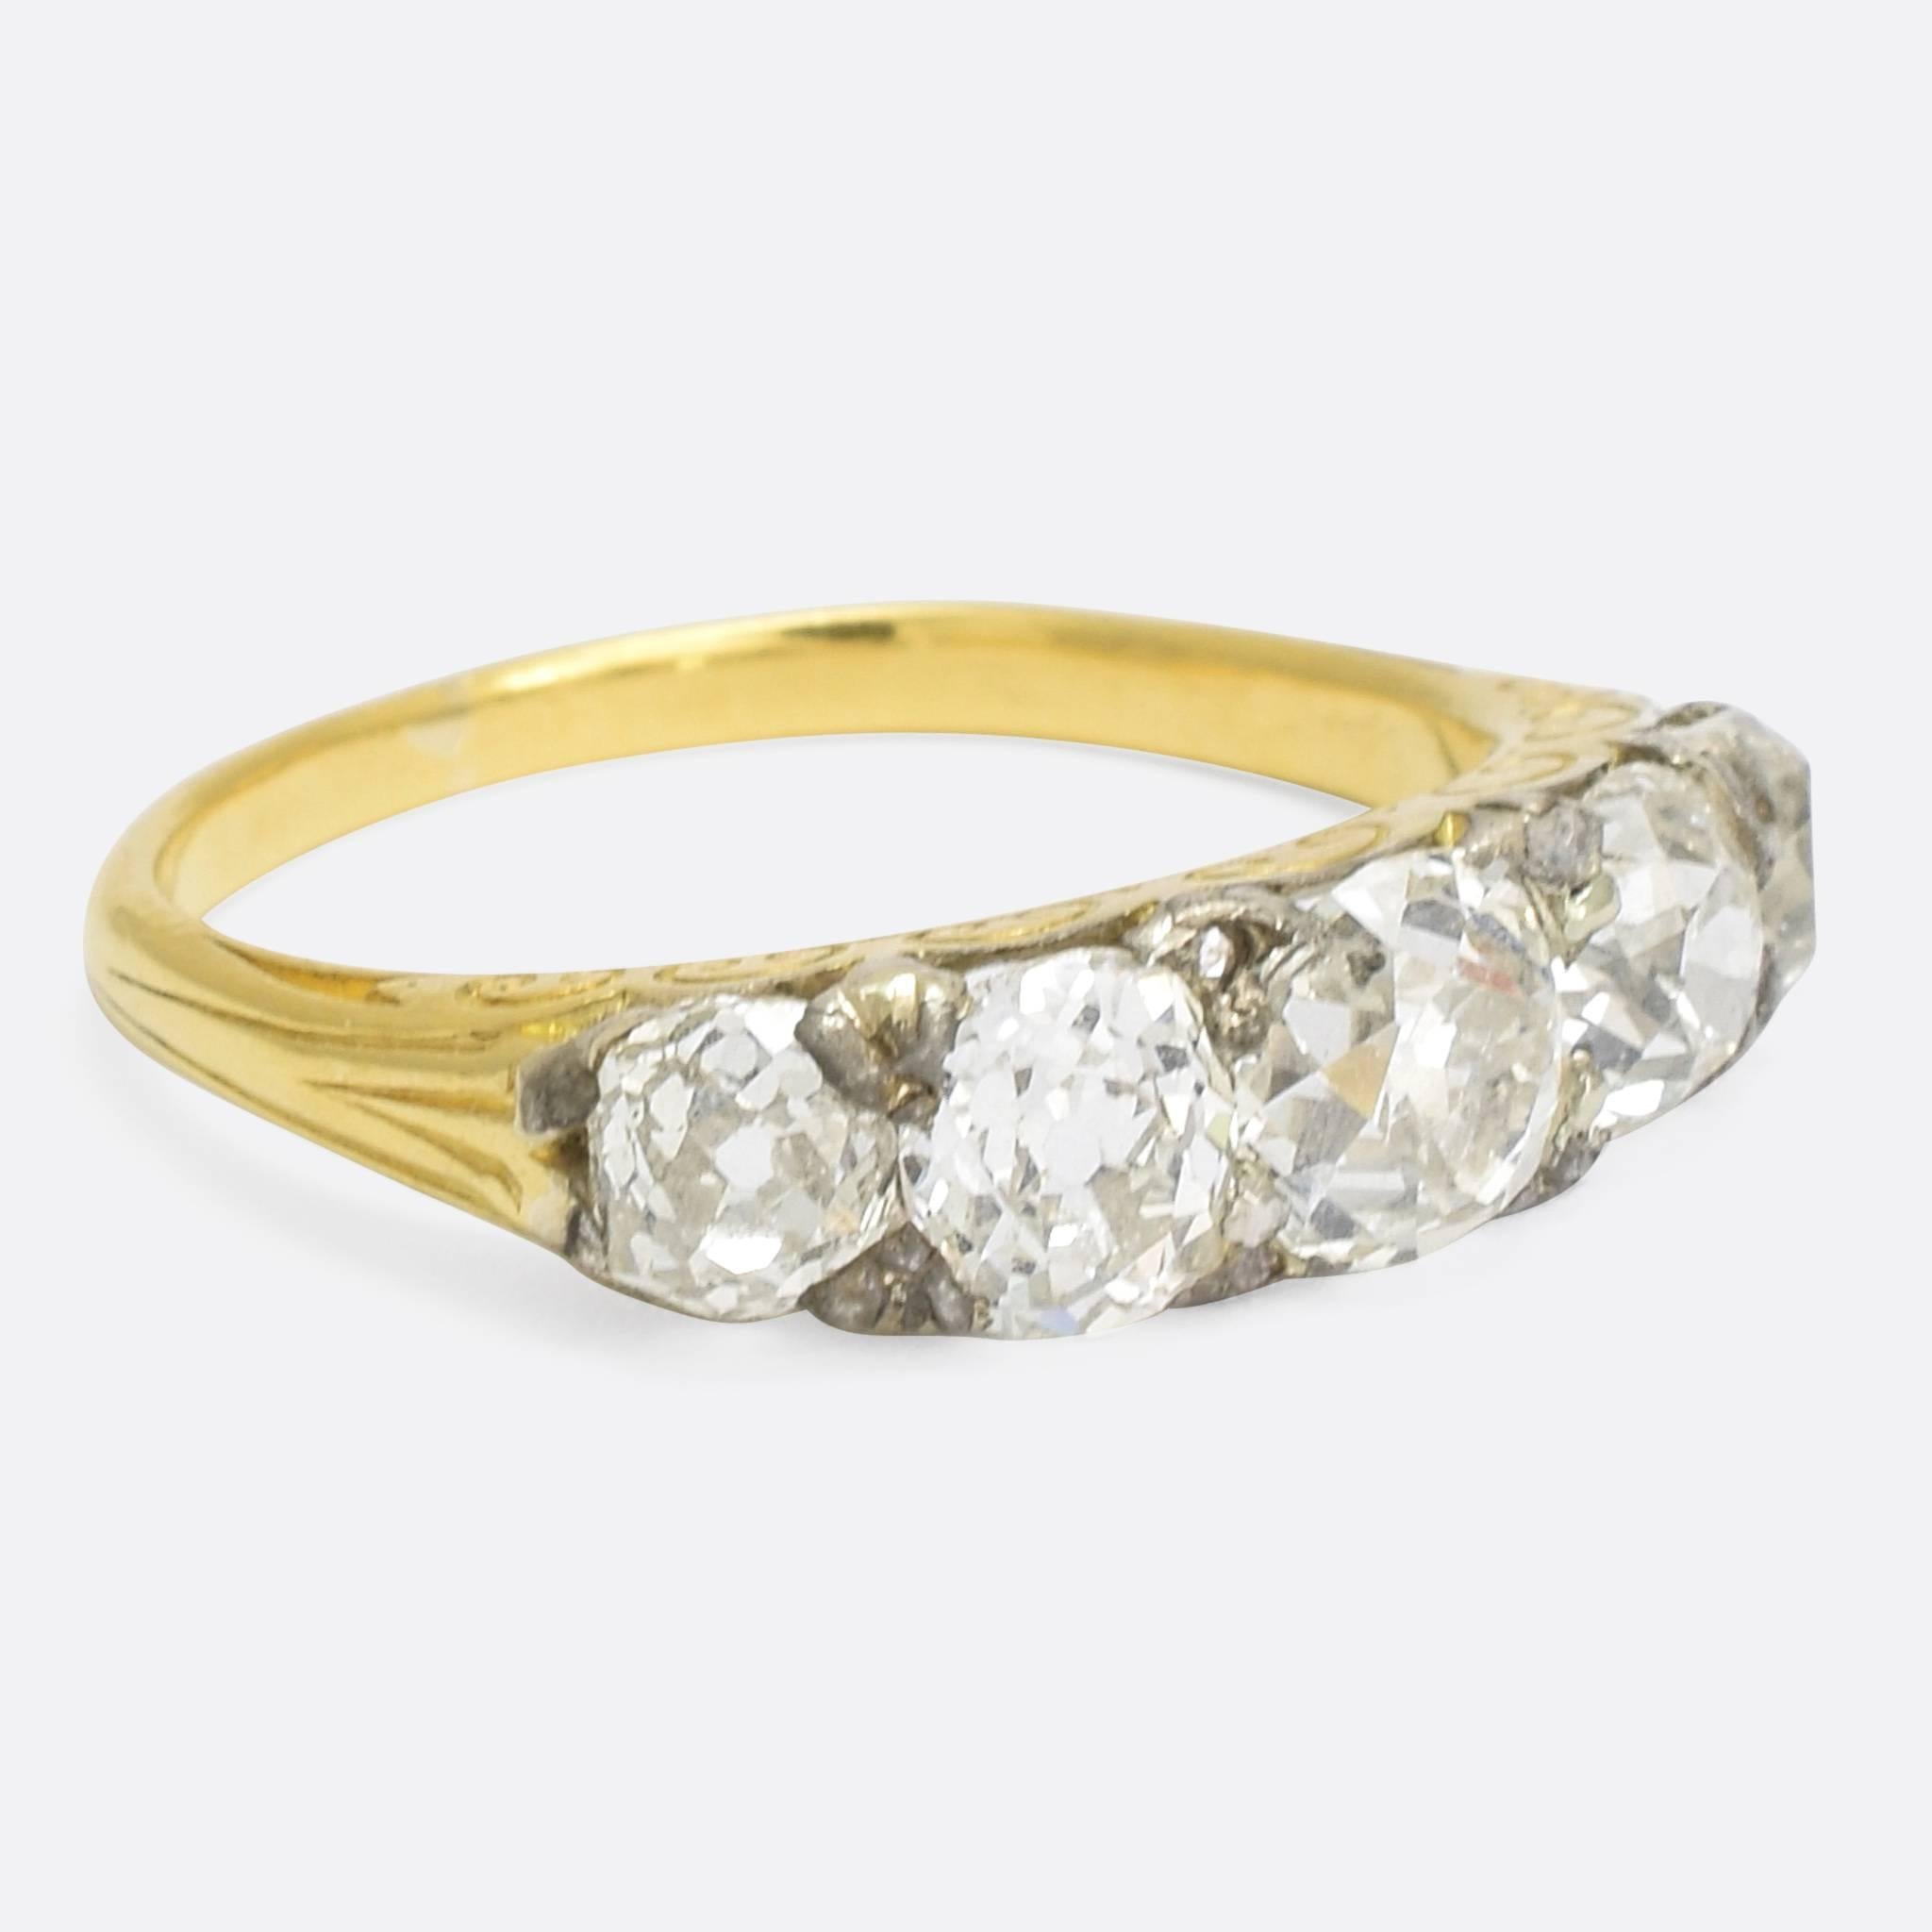 An exceptional antique diamond 5-stone band dating to the mid-Victorian era, c.1870. It's set with gorgeous cushion cut diamonds - just over 2 carats in total - and modelled in 18k gold with silver settings. The gallery features pretty scrolled